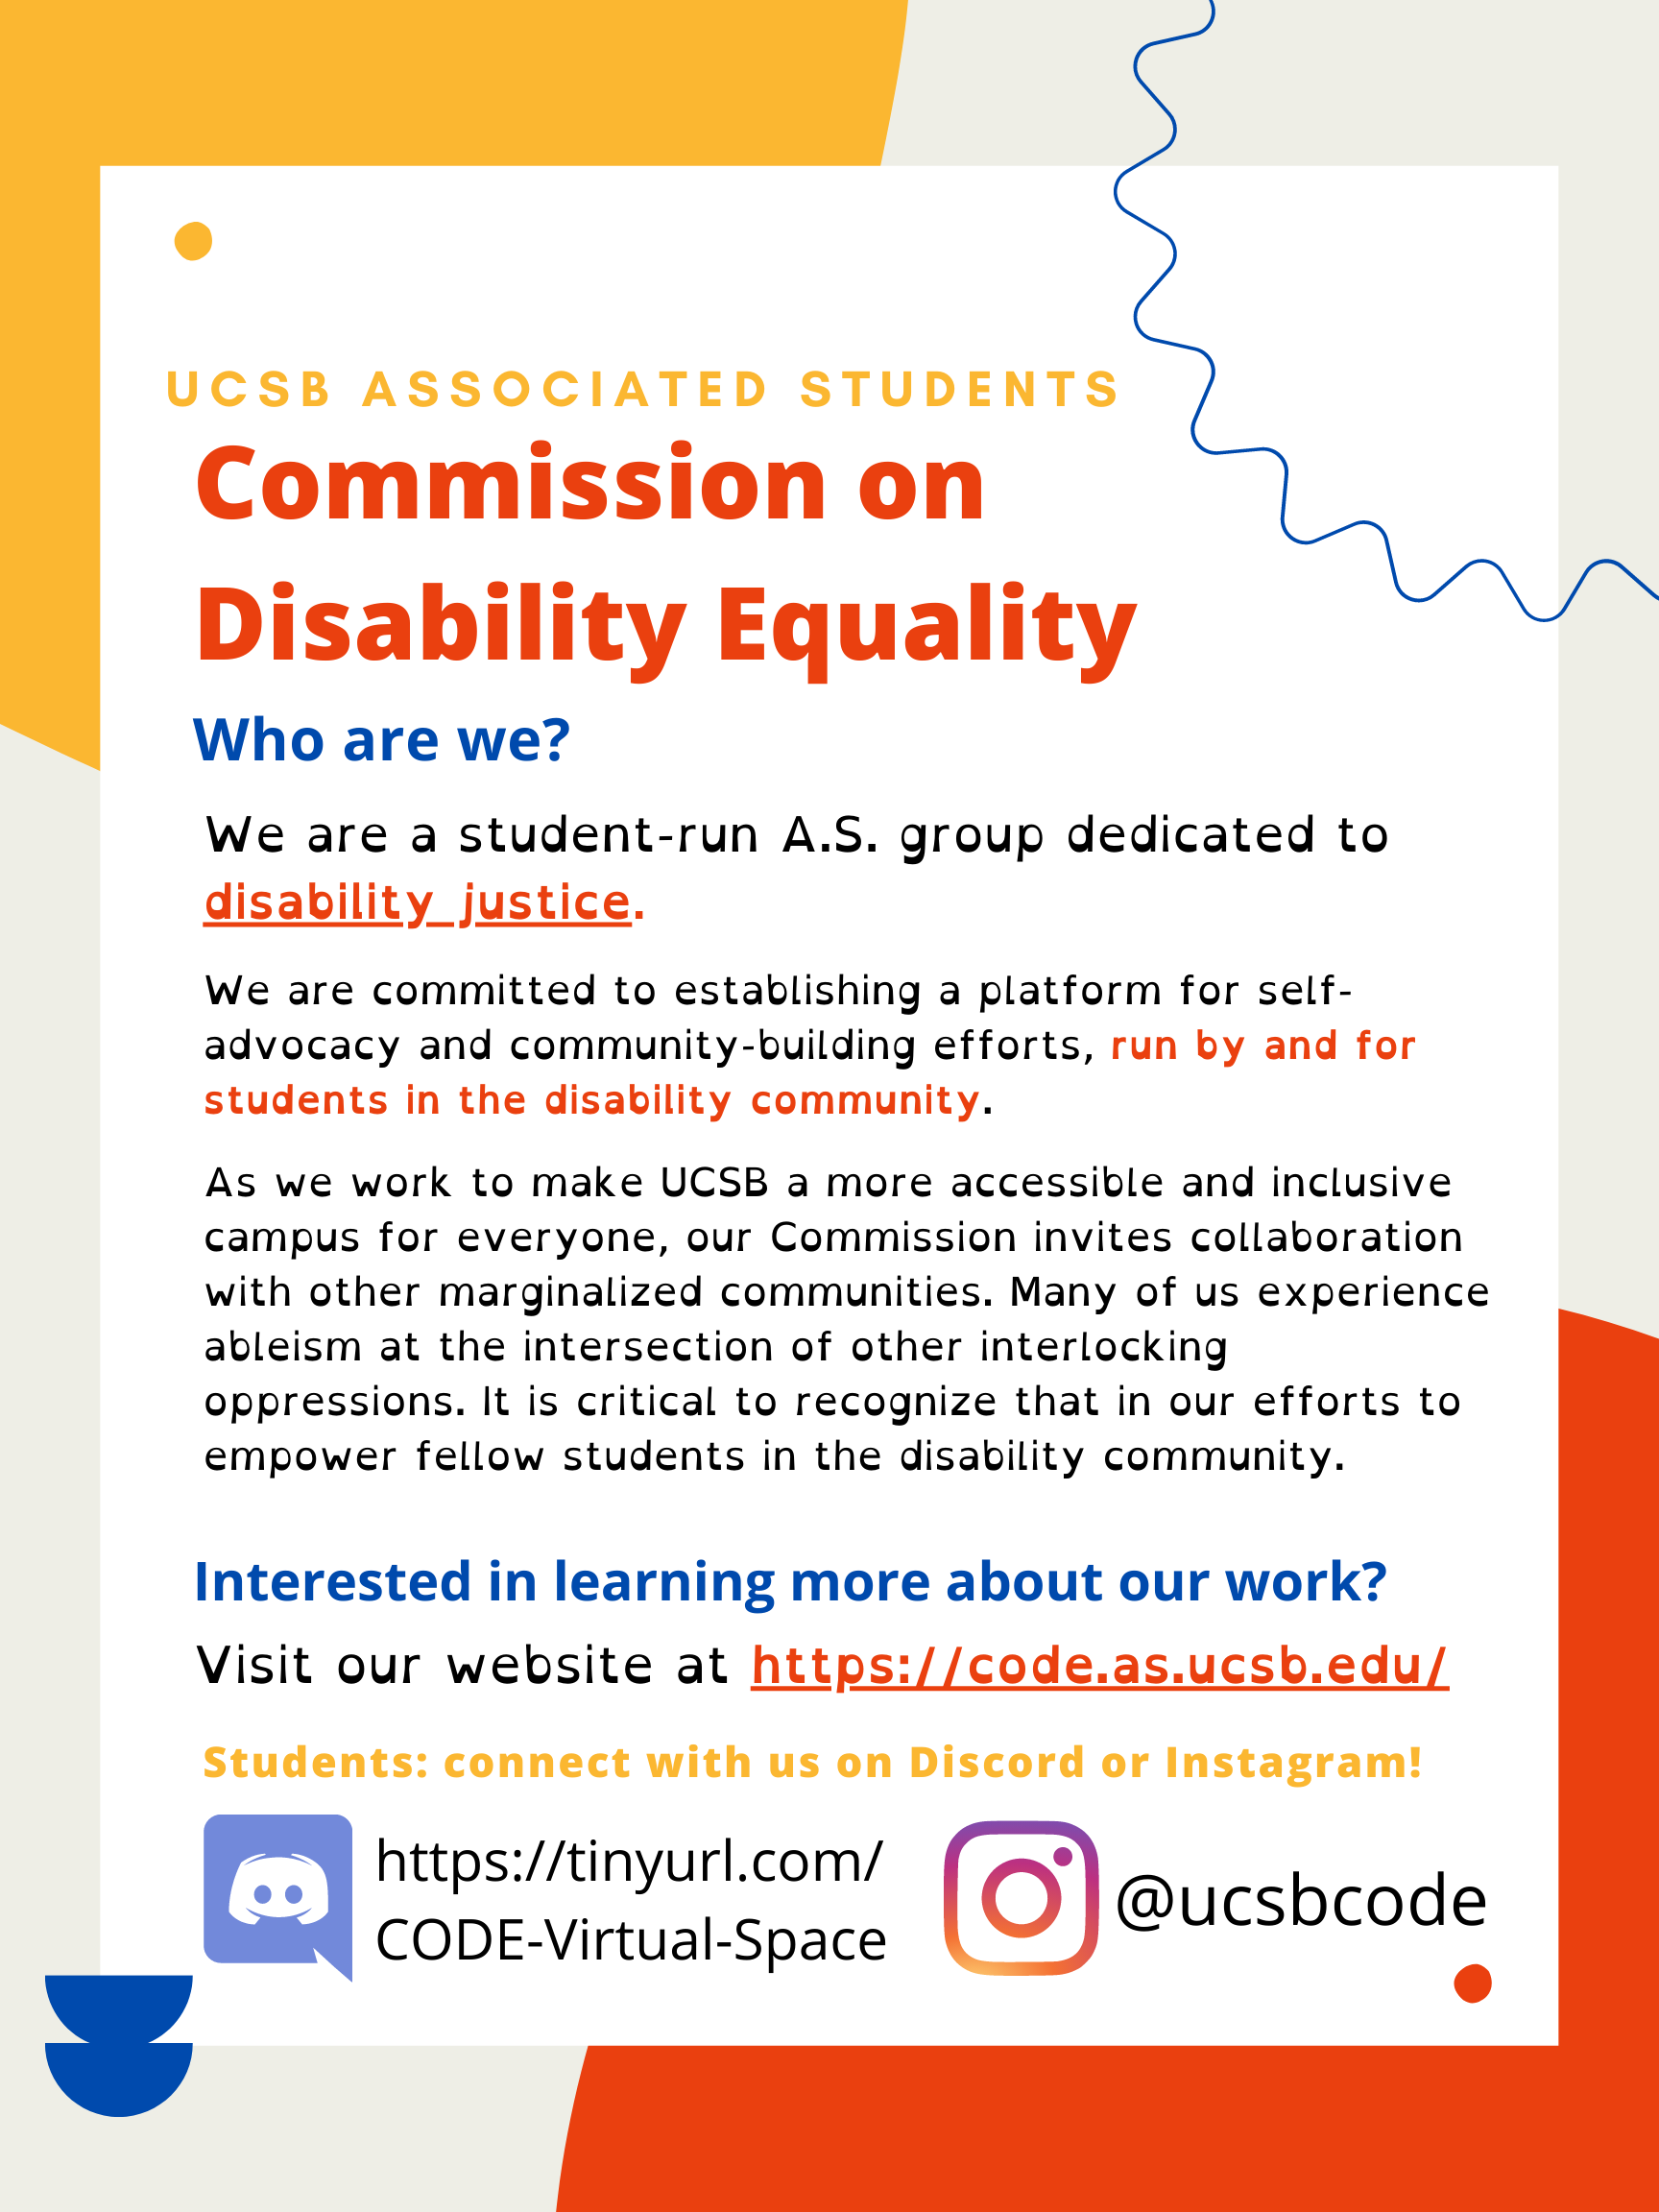 CODE flyer regarding who they are and how to learn more about their work. Alt text provided elsewhere on this page.